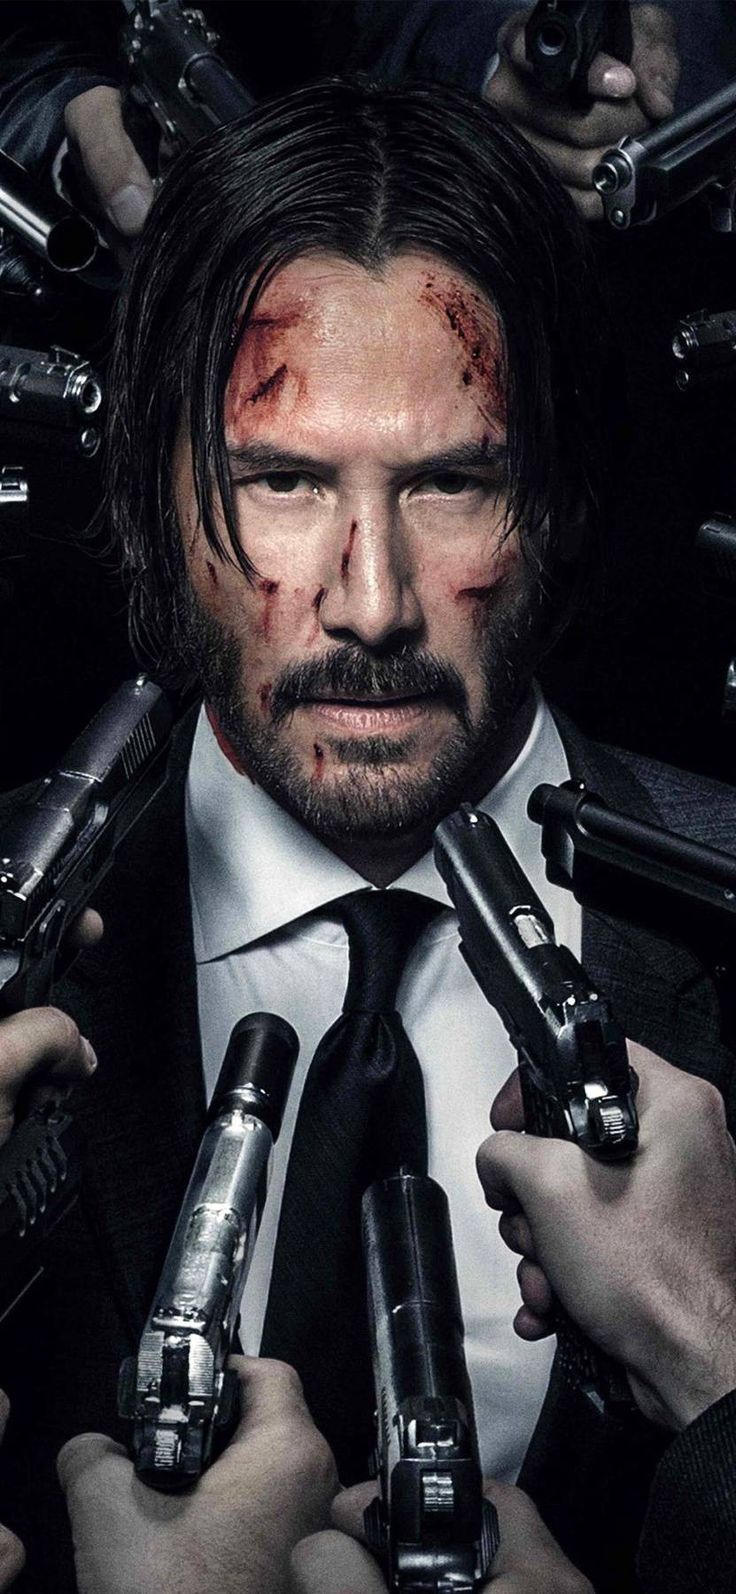 Keanu Reeves as John Wick holding a gun in each hand with blood on his face - John Wick